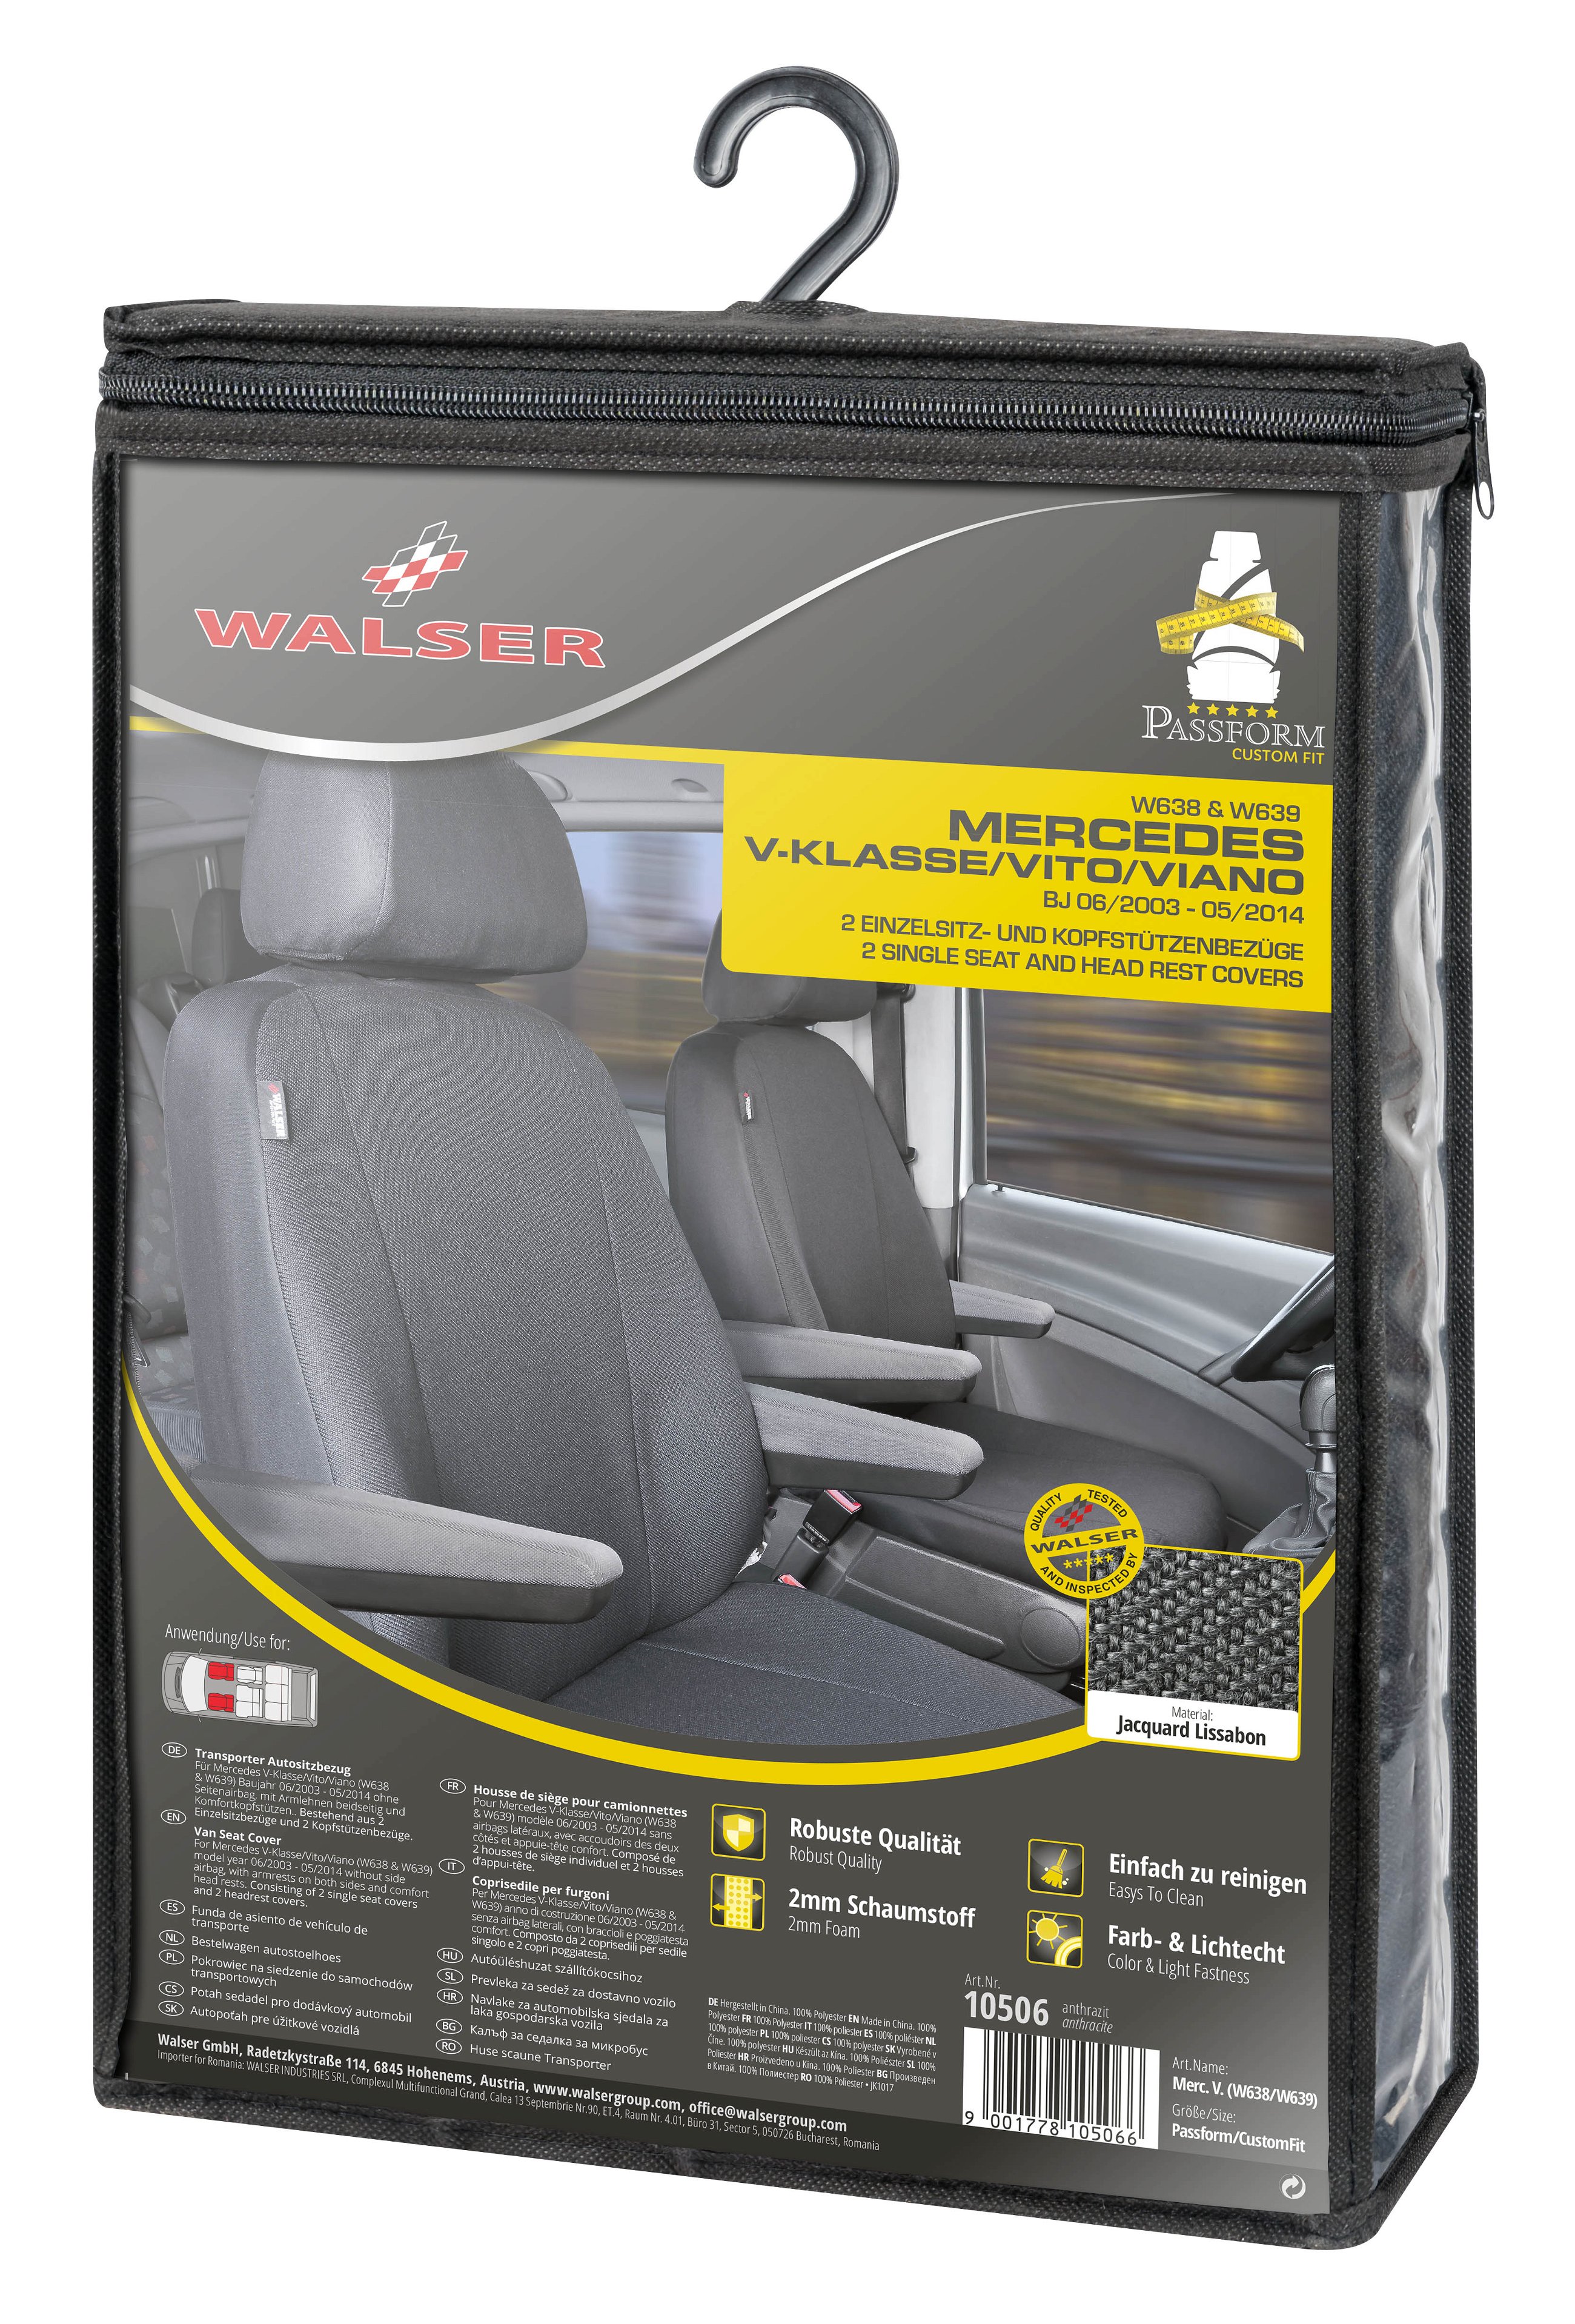 Seat cover made of fabric for Mercedes Vito/Viano, 2 single seat covers for armrest inside + outside